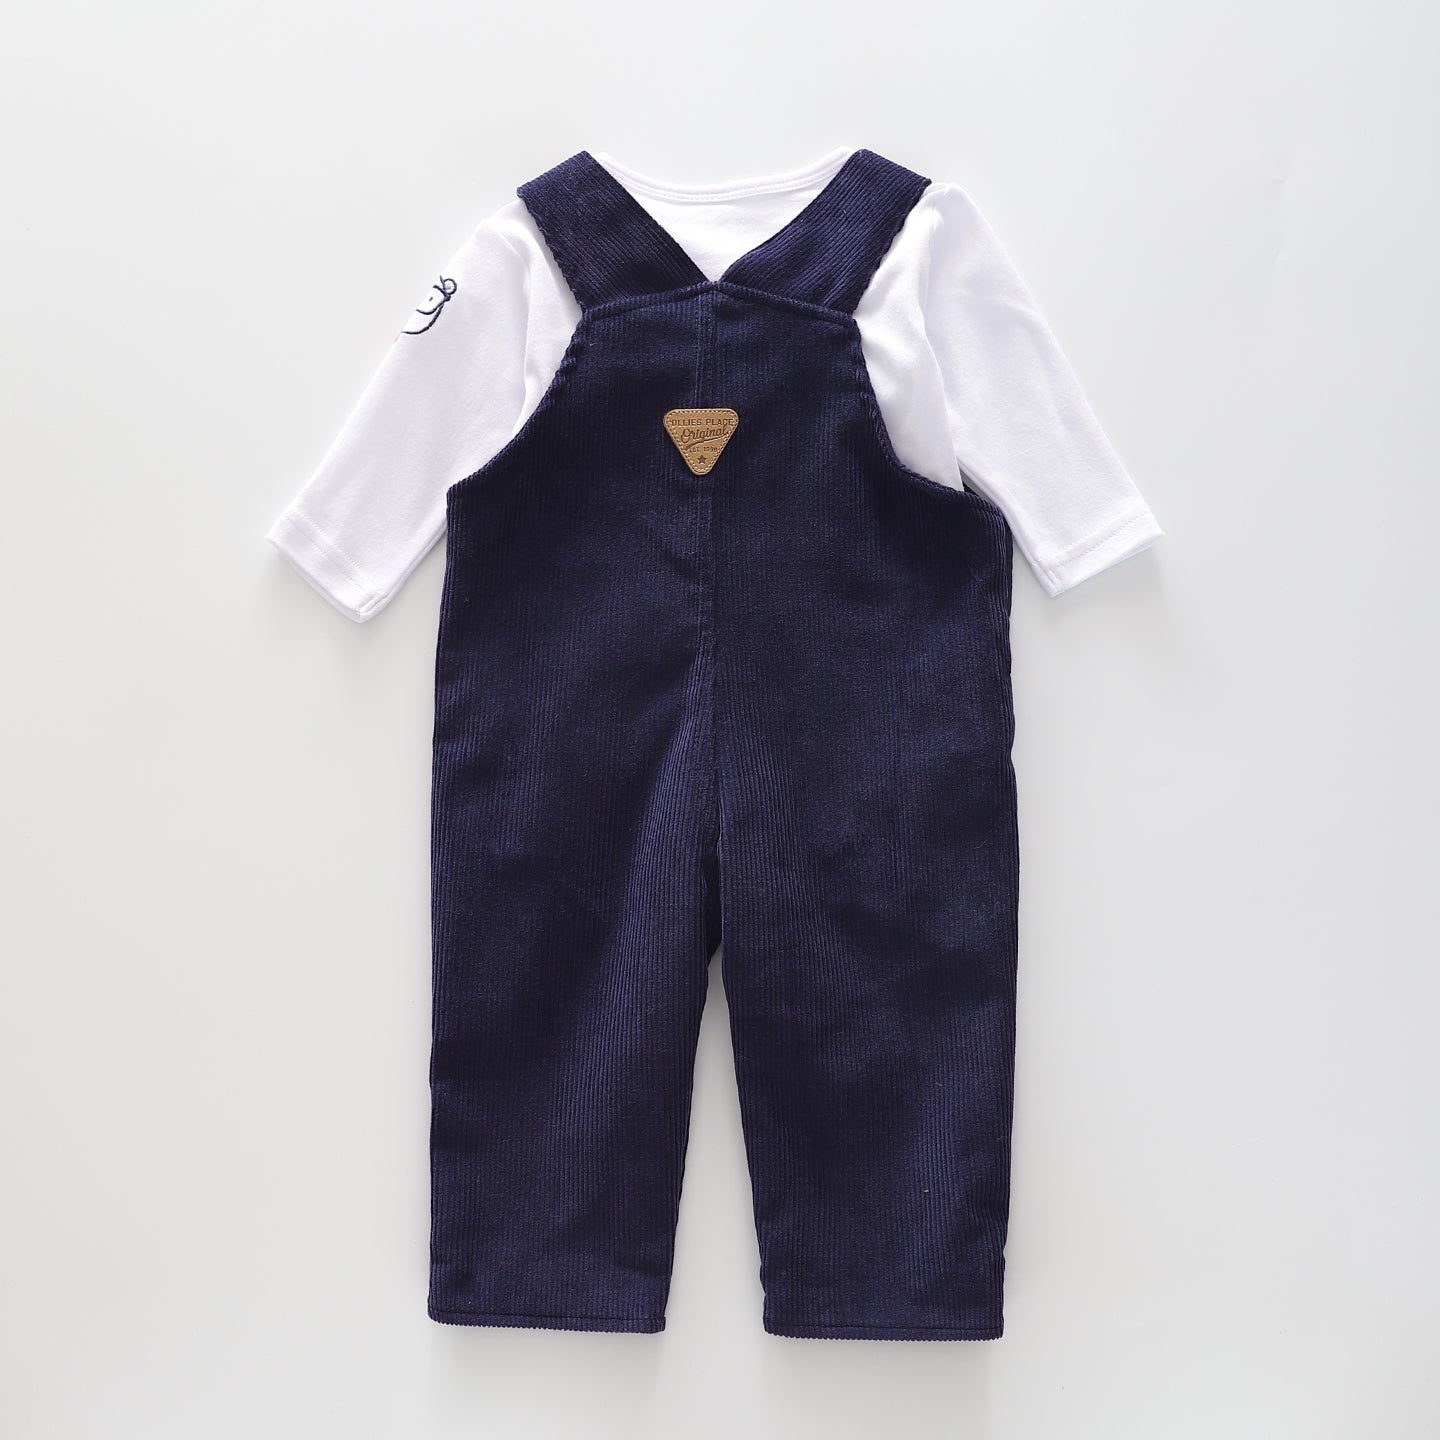 Baby Bear Blue and White Overall Set